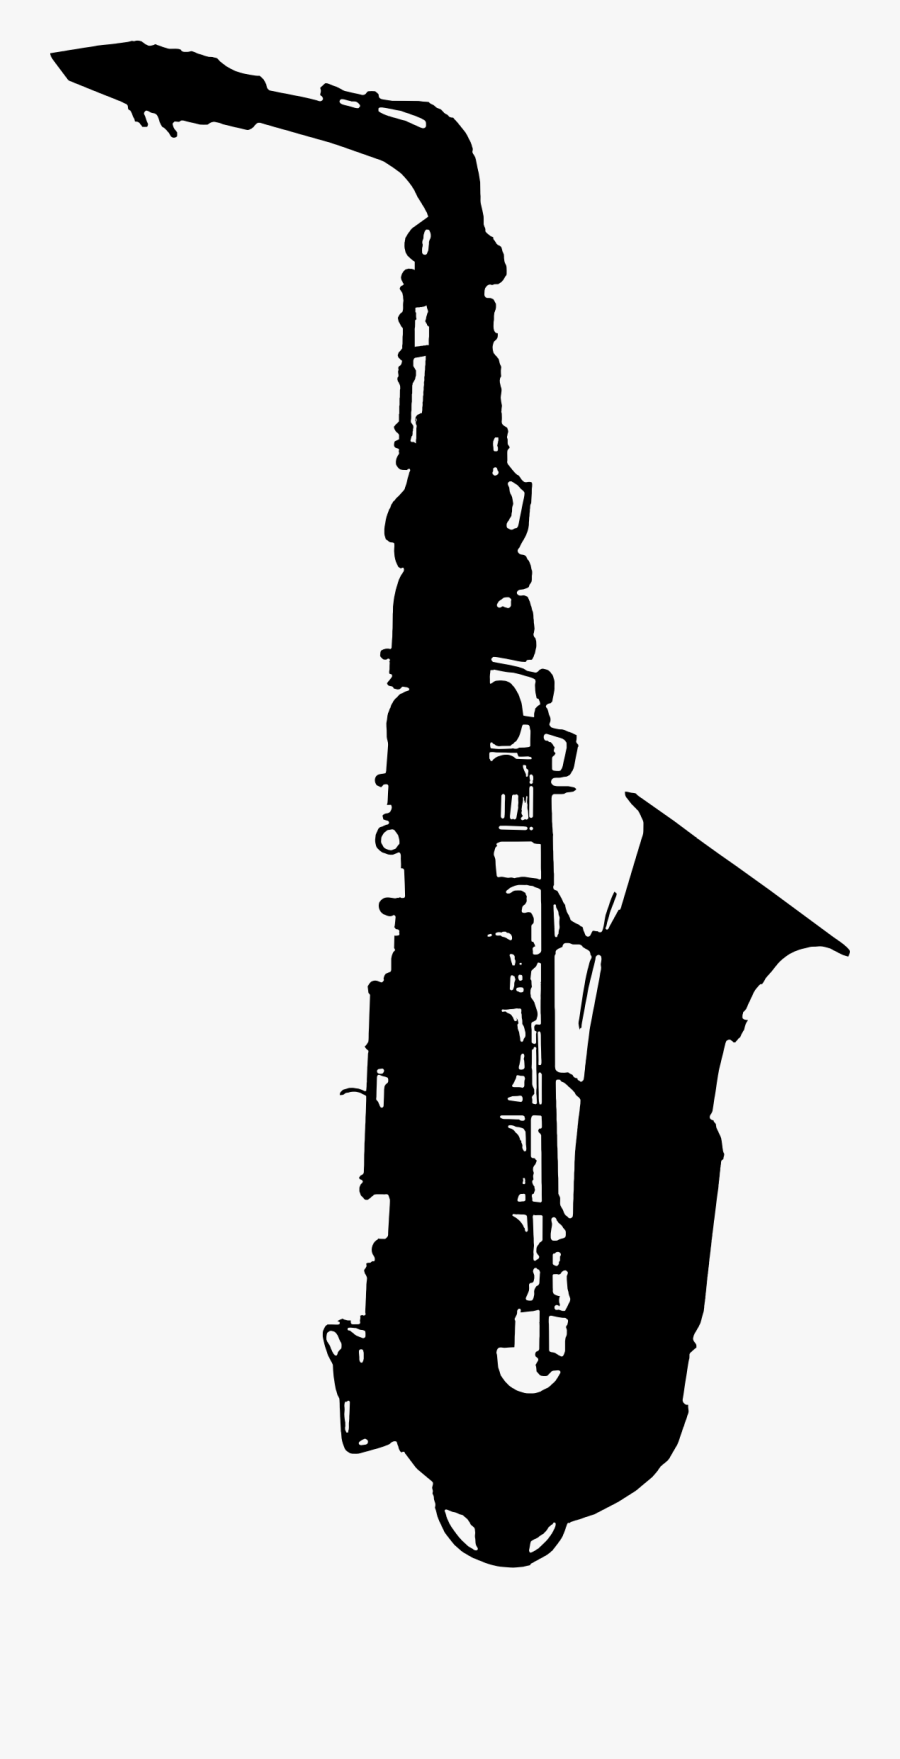 Clip Art Collection Of Free Drawing - Saxophone Silhouette Clip Art, Transparent Clipart